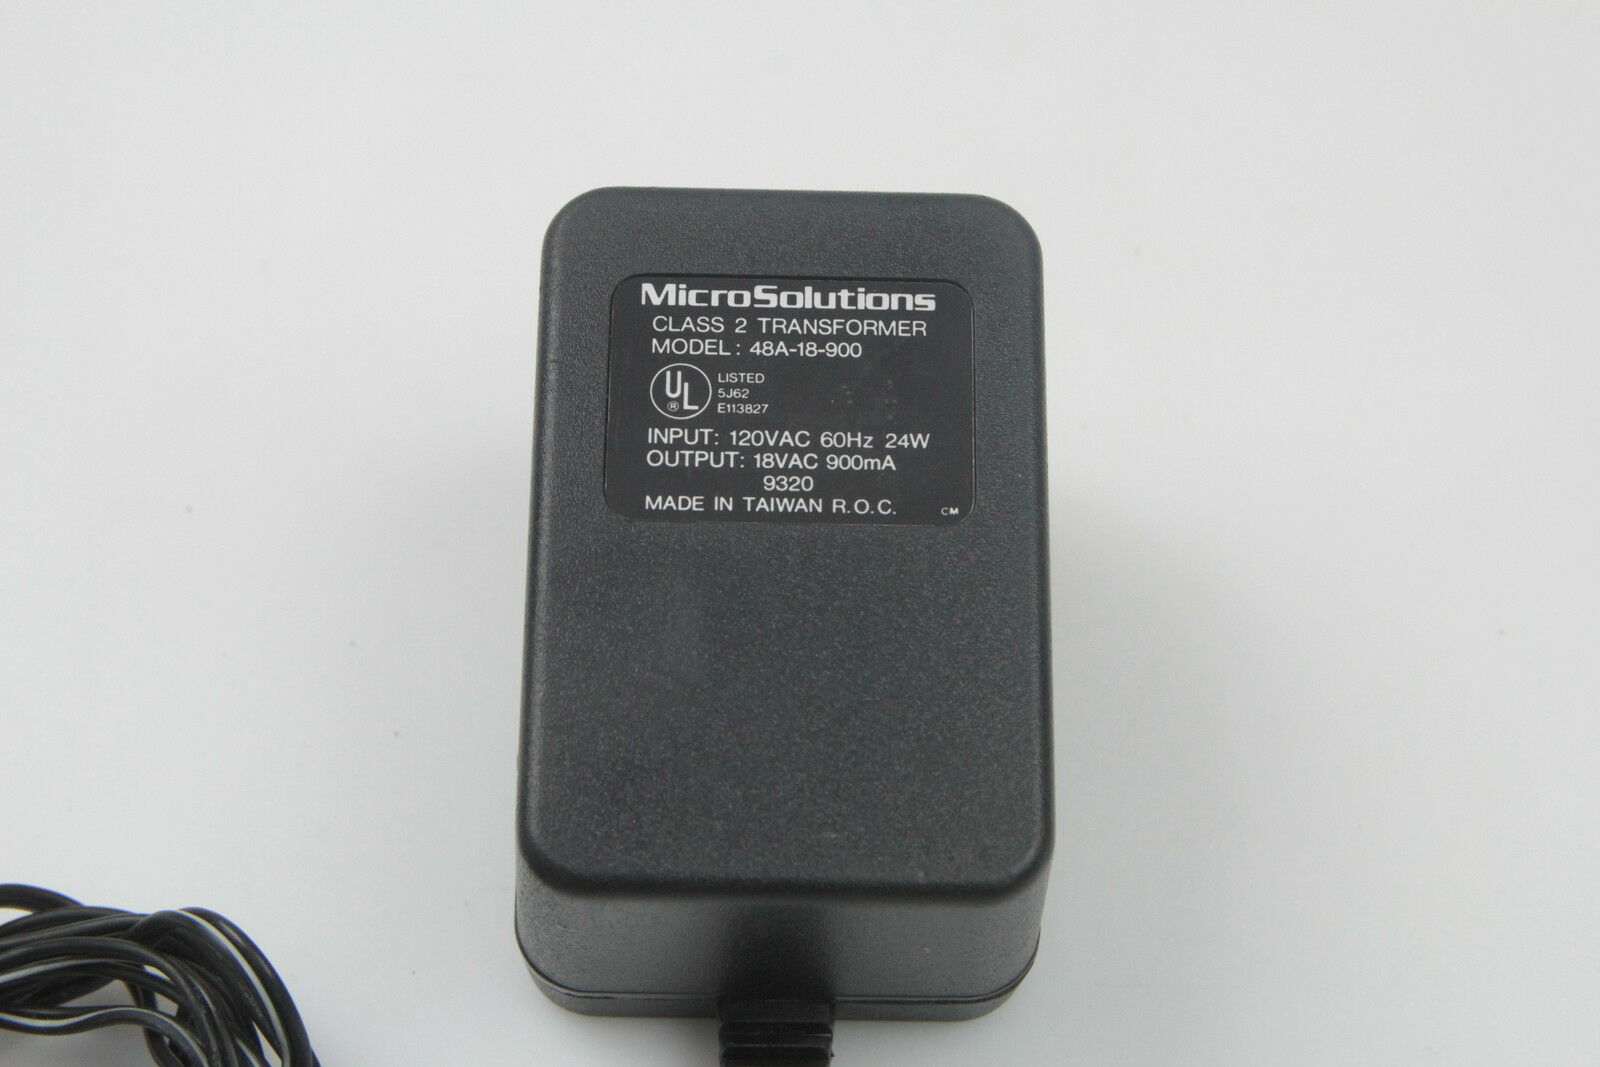 New Micro Solutions AC Adapter 18VAC 900mA 48A-18-900 Class 2 Transformer power supply Product Des